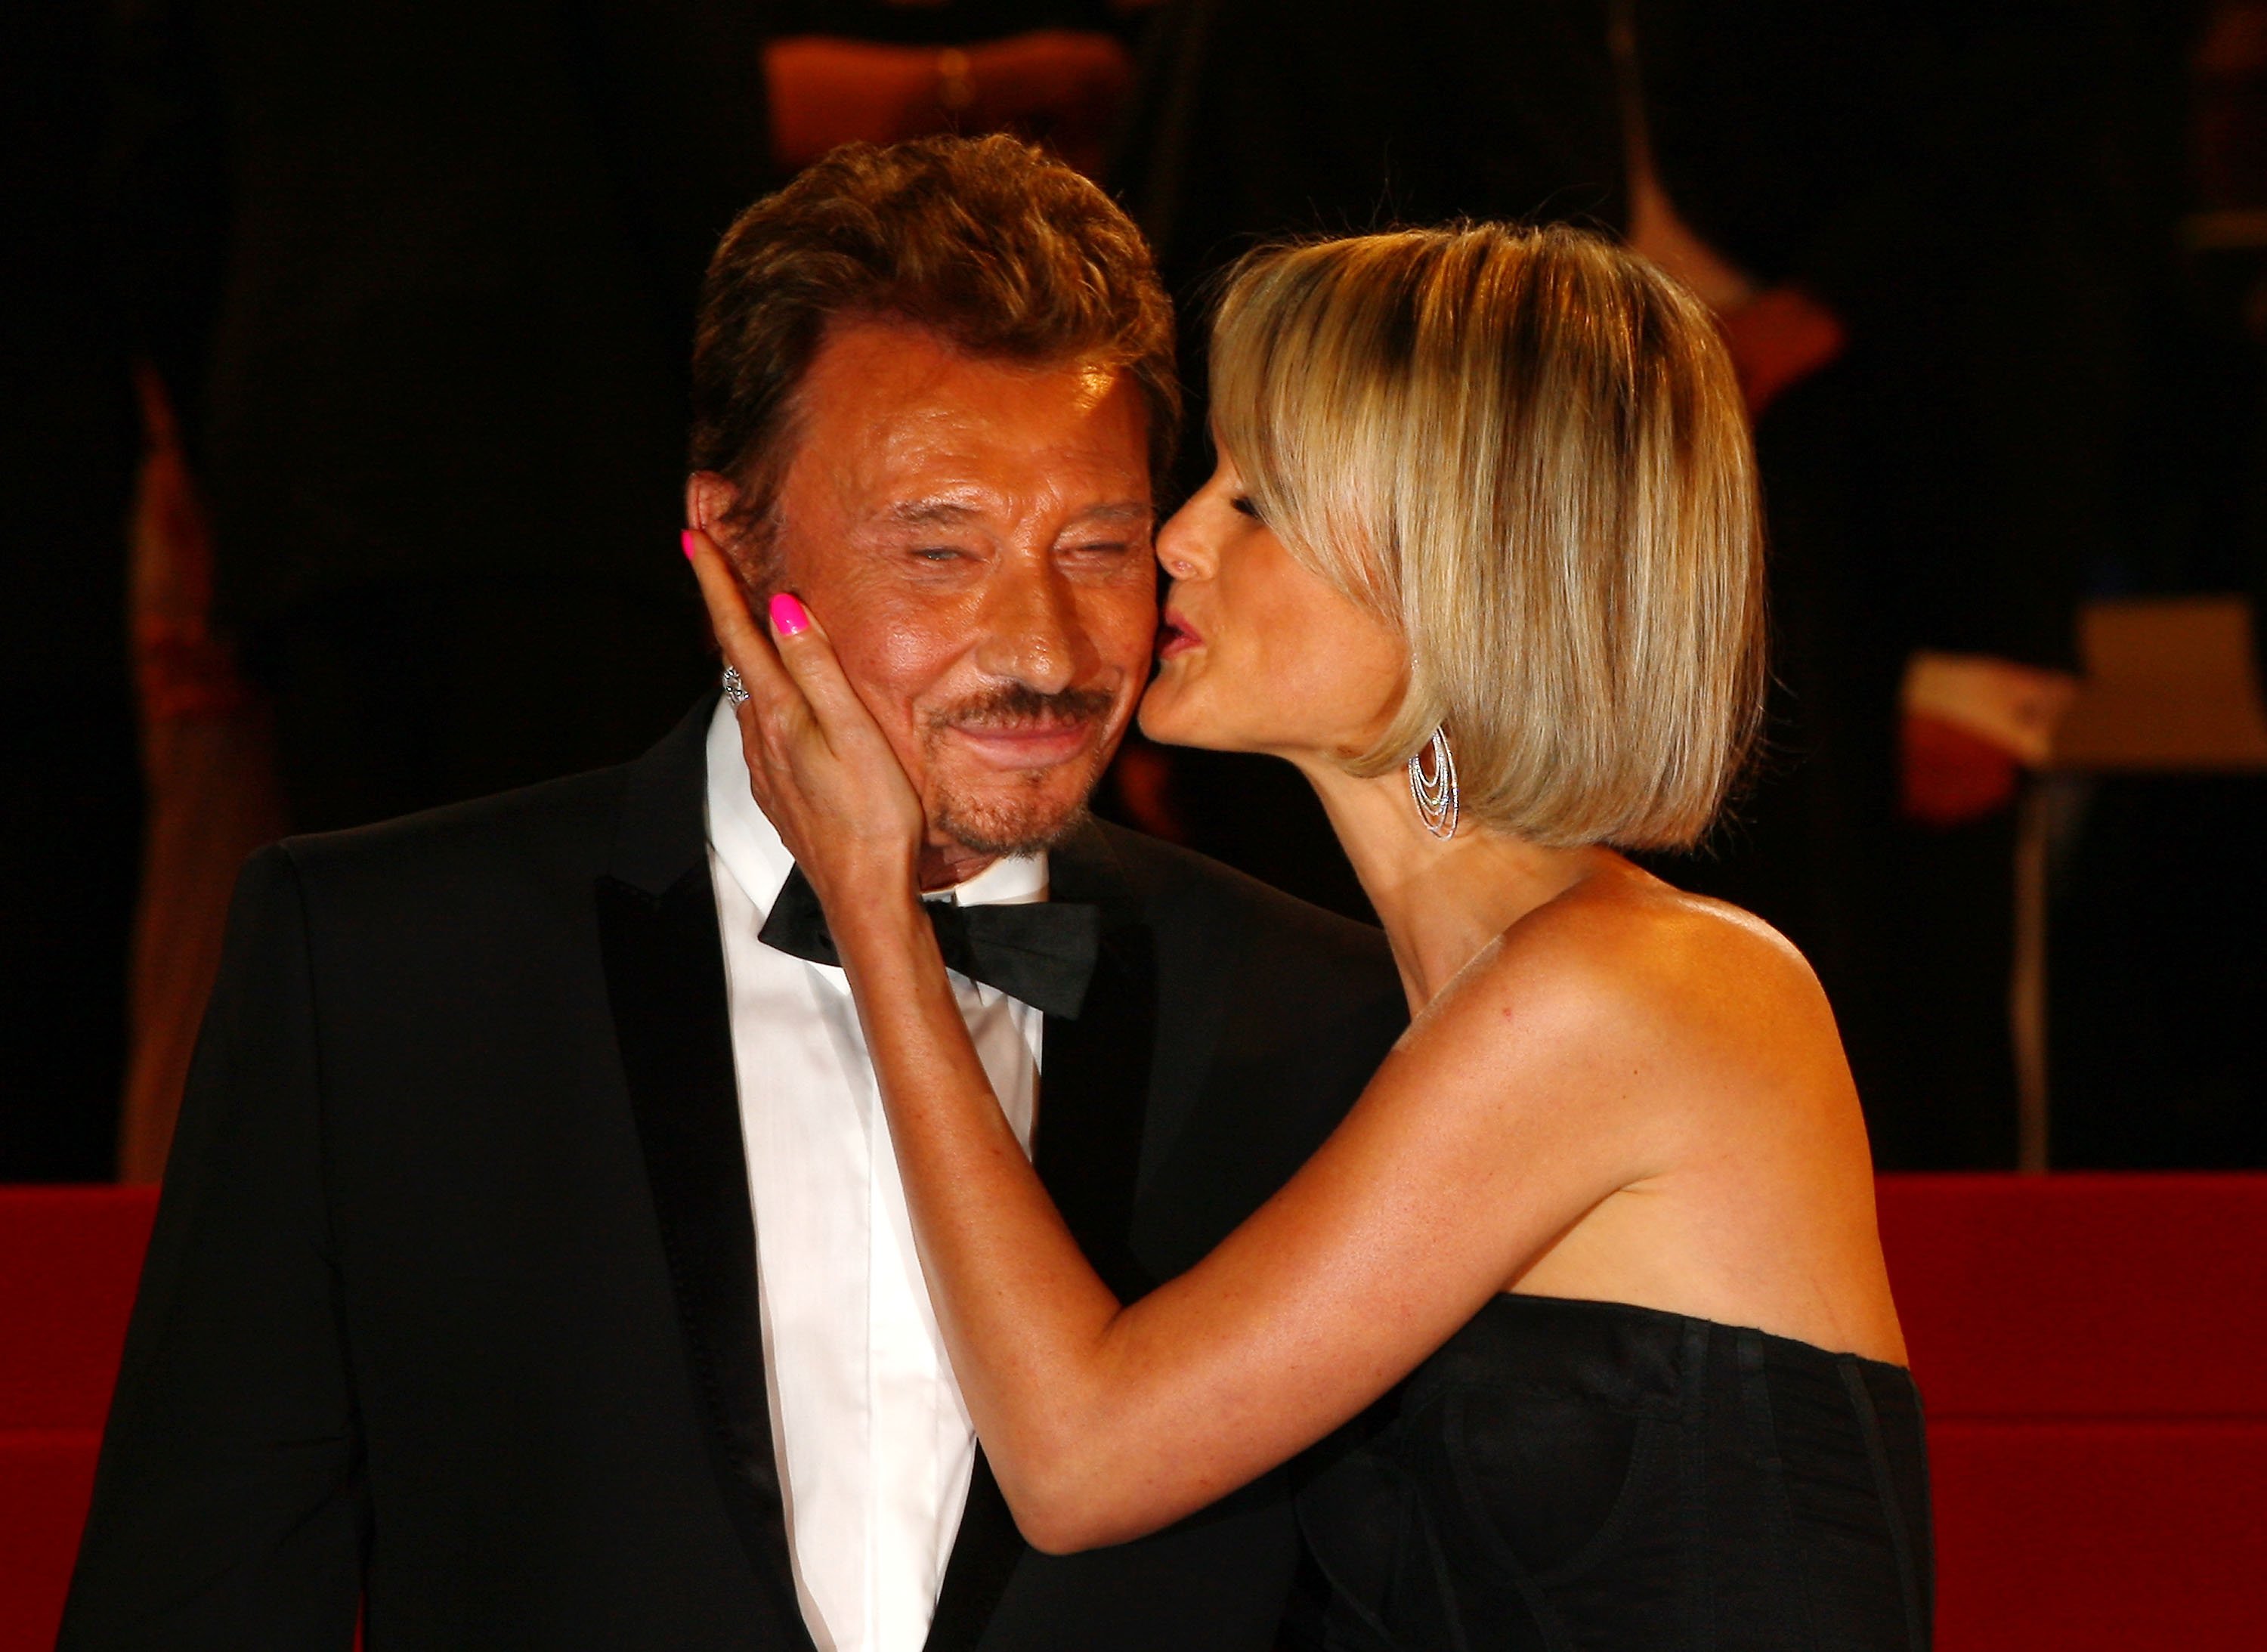 Johnny et Laeticia Hallyday. | photo : Getty Images